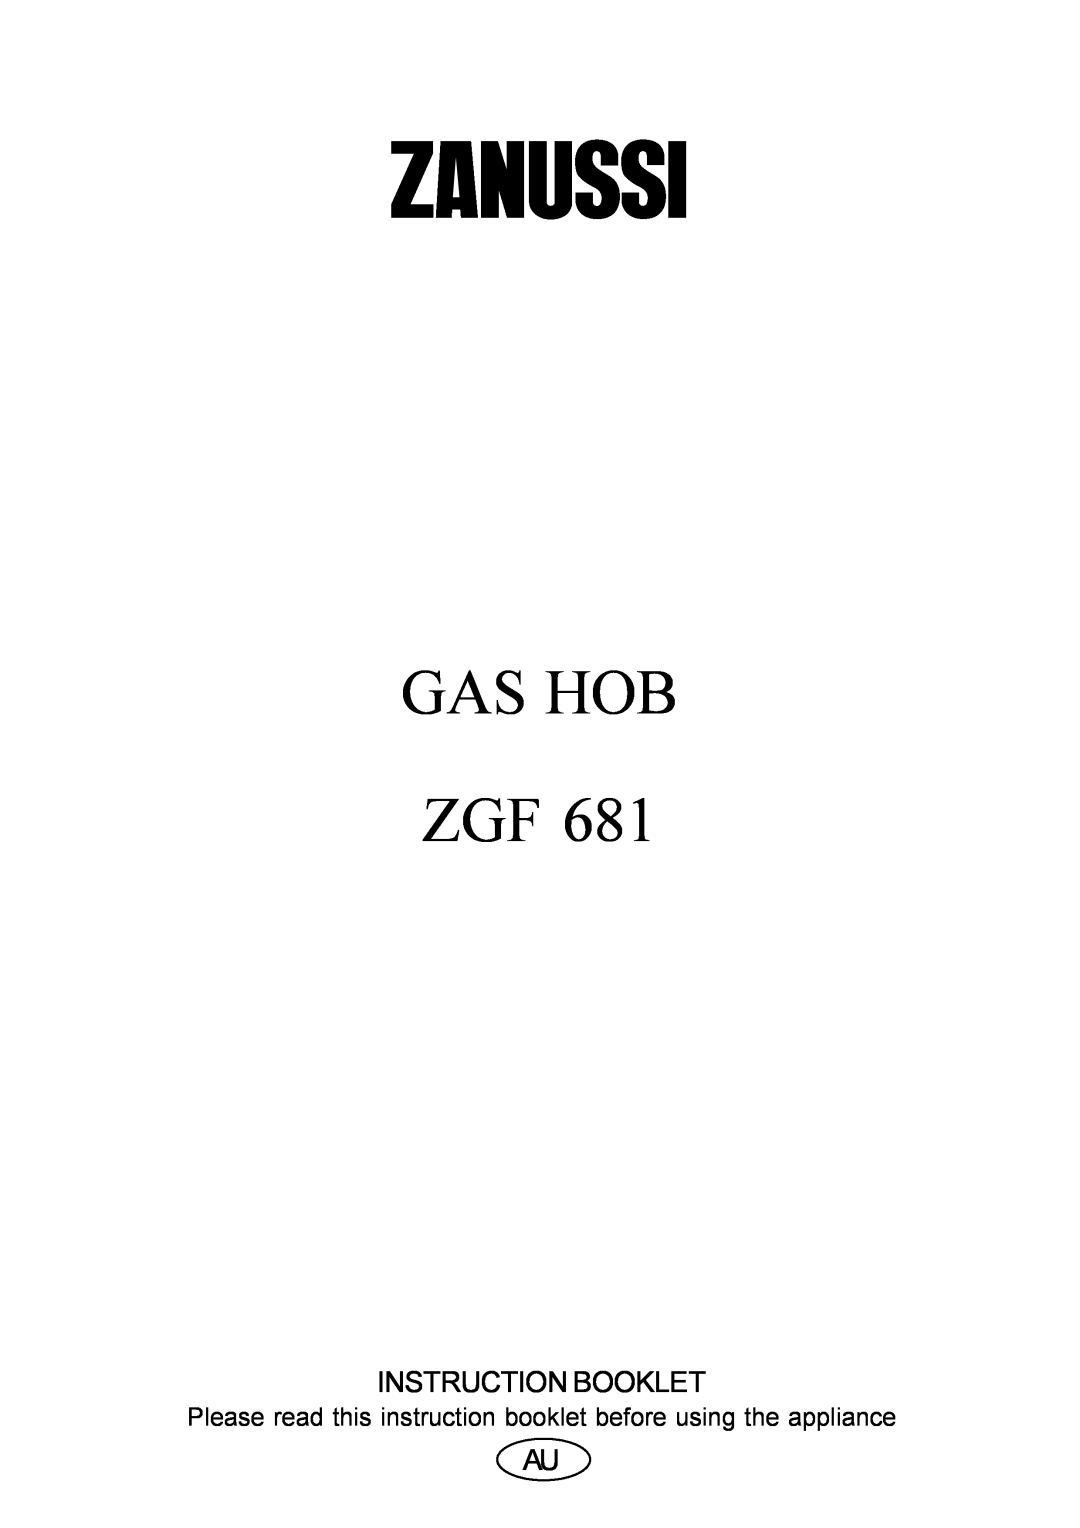 Zanussi ZGF 681 manual Instruction Booklet, Gas Hob Zgf, Please read this instruction booklet before using the appliance 